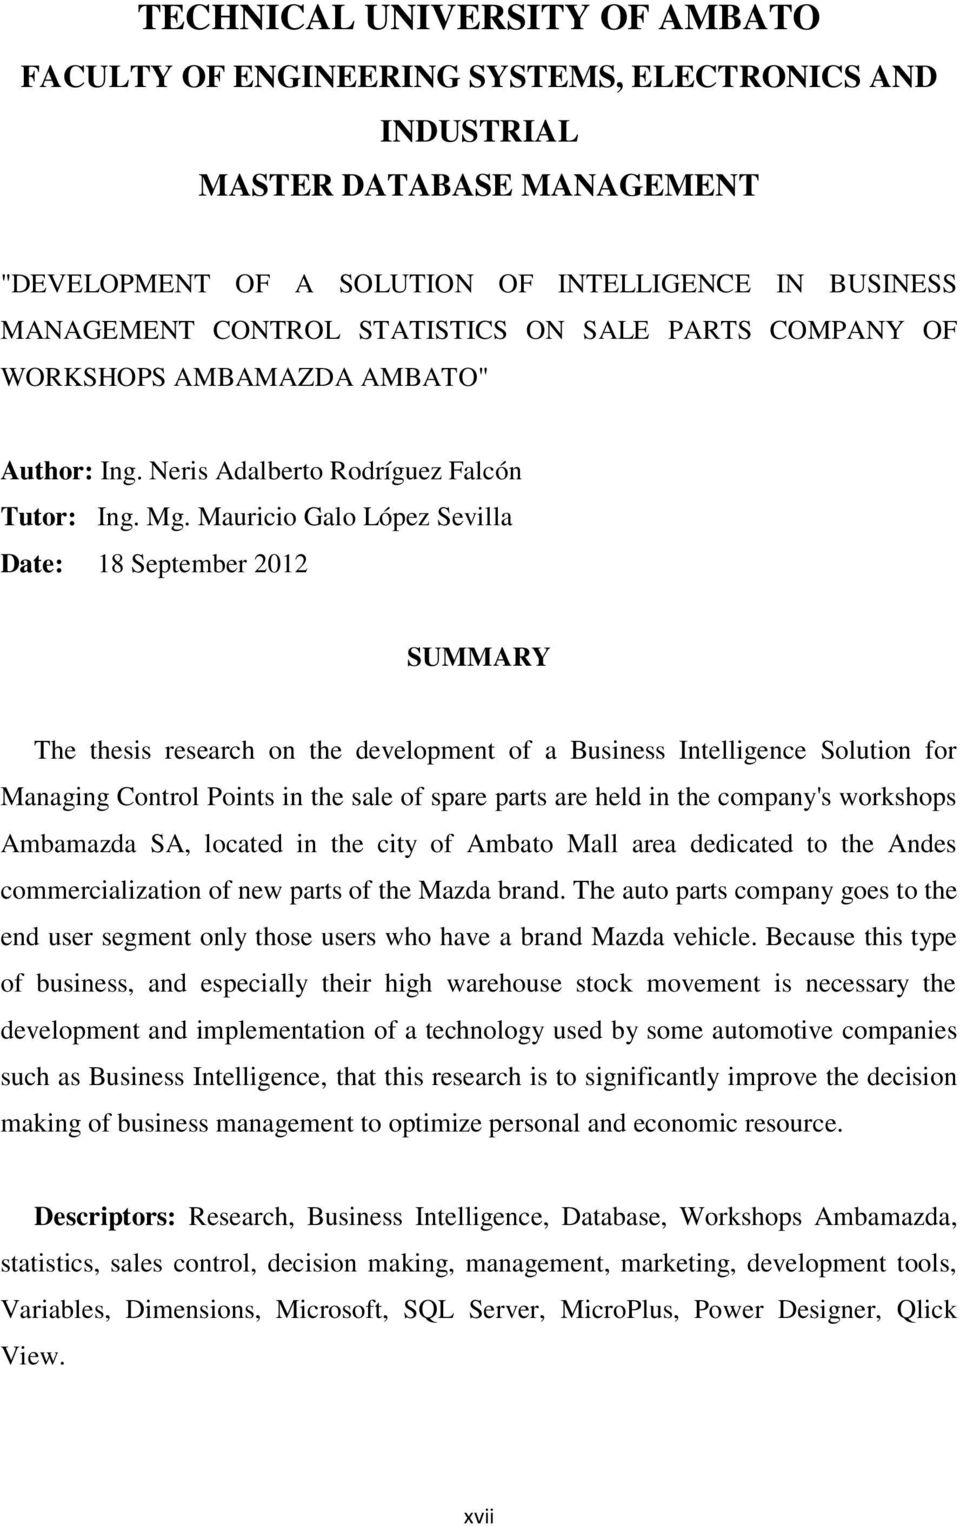 Mauricio Galo López Sevilla Date: 18 September 2012 SUMMARY The thesis research on the development of a Business Intelligence Solution for Managing Control Points in the sale of spare parts are held